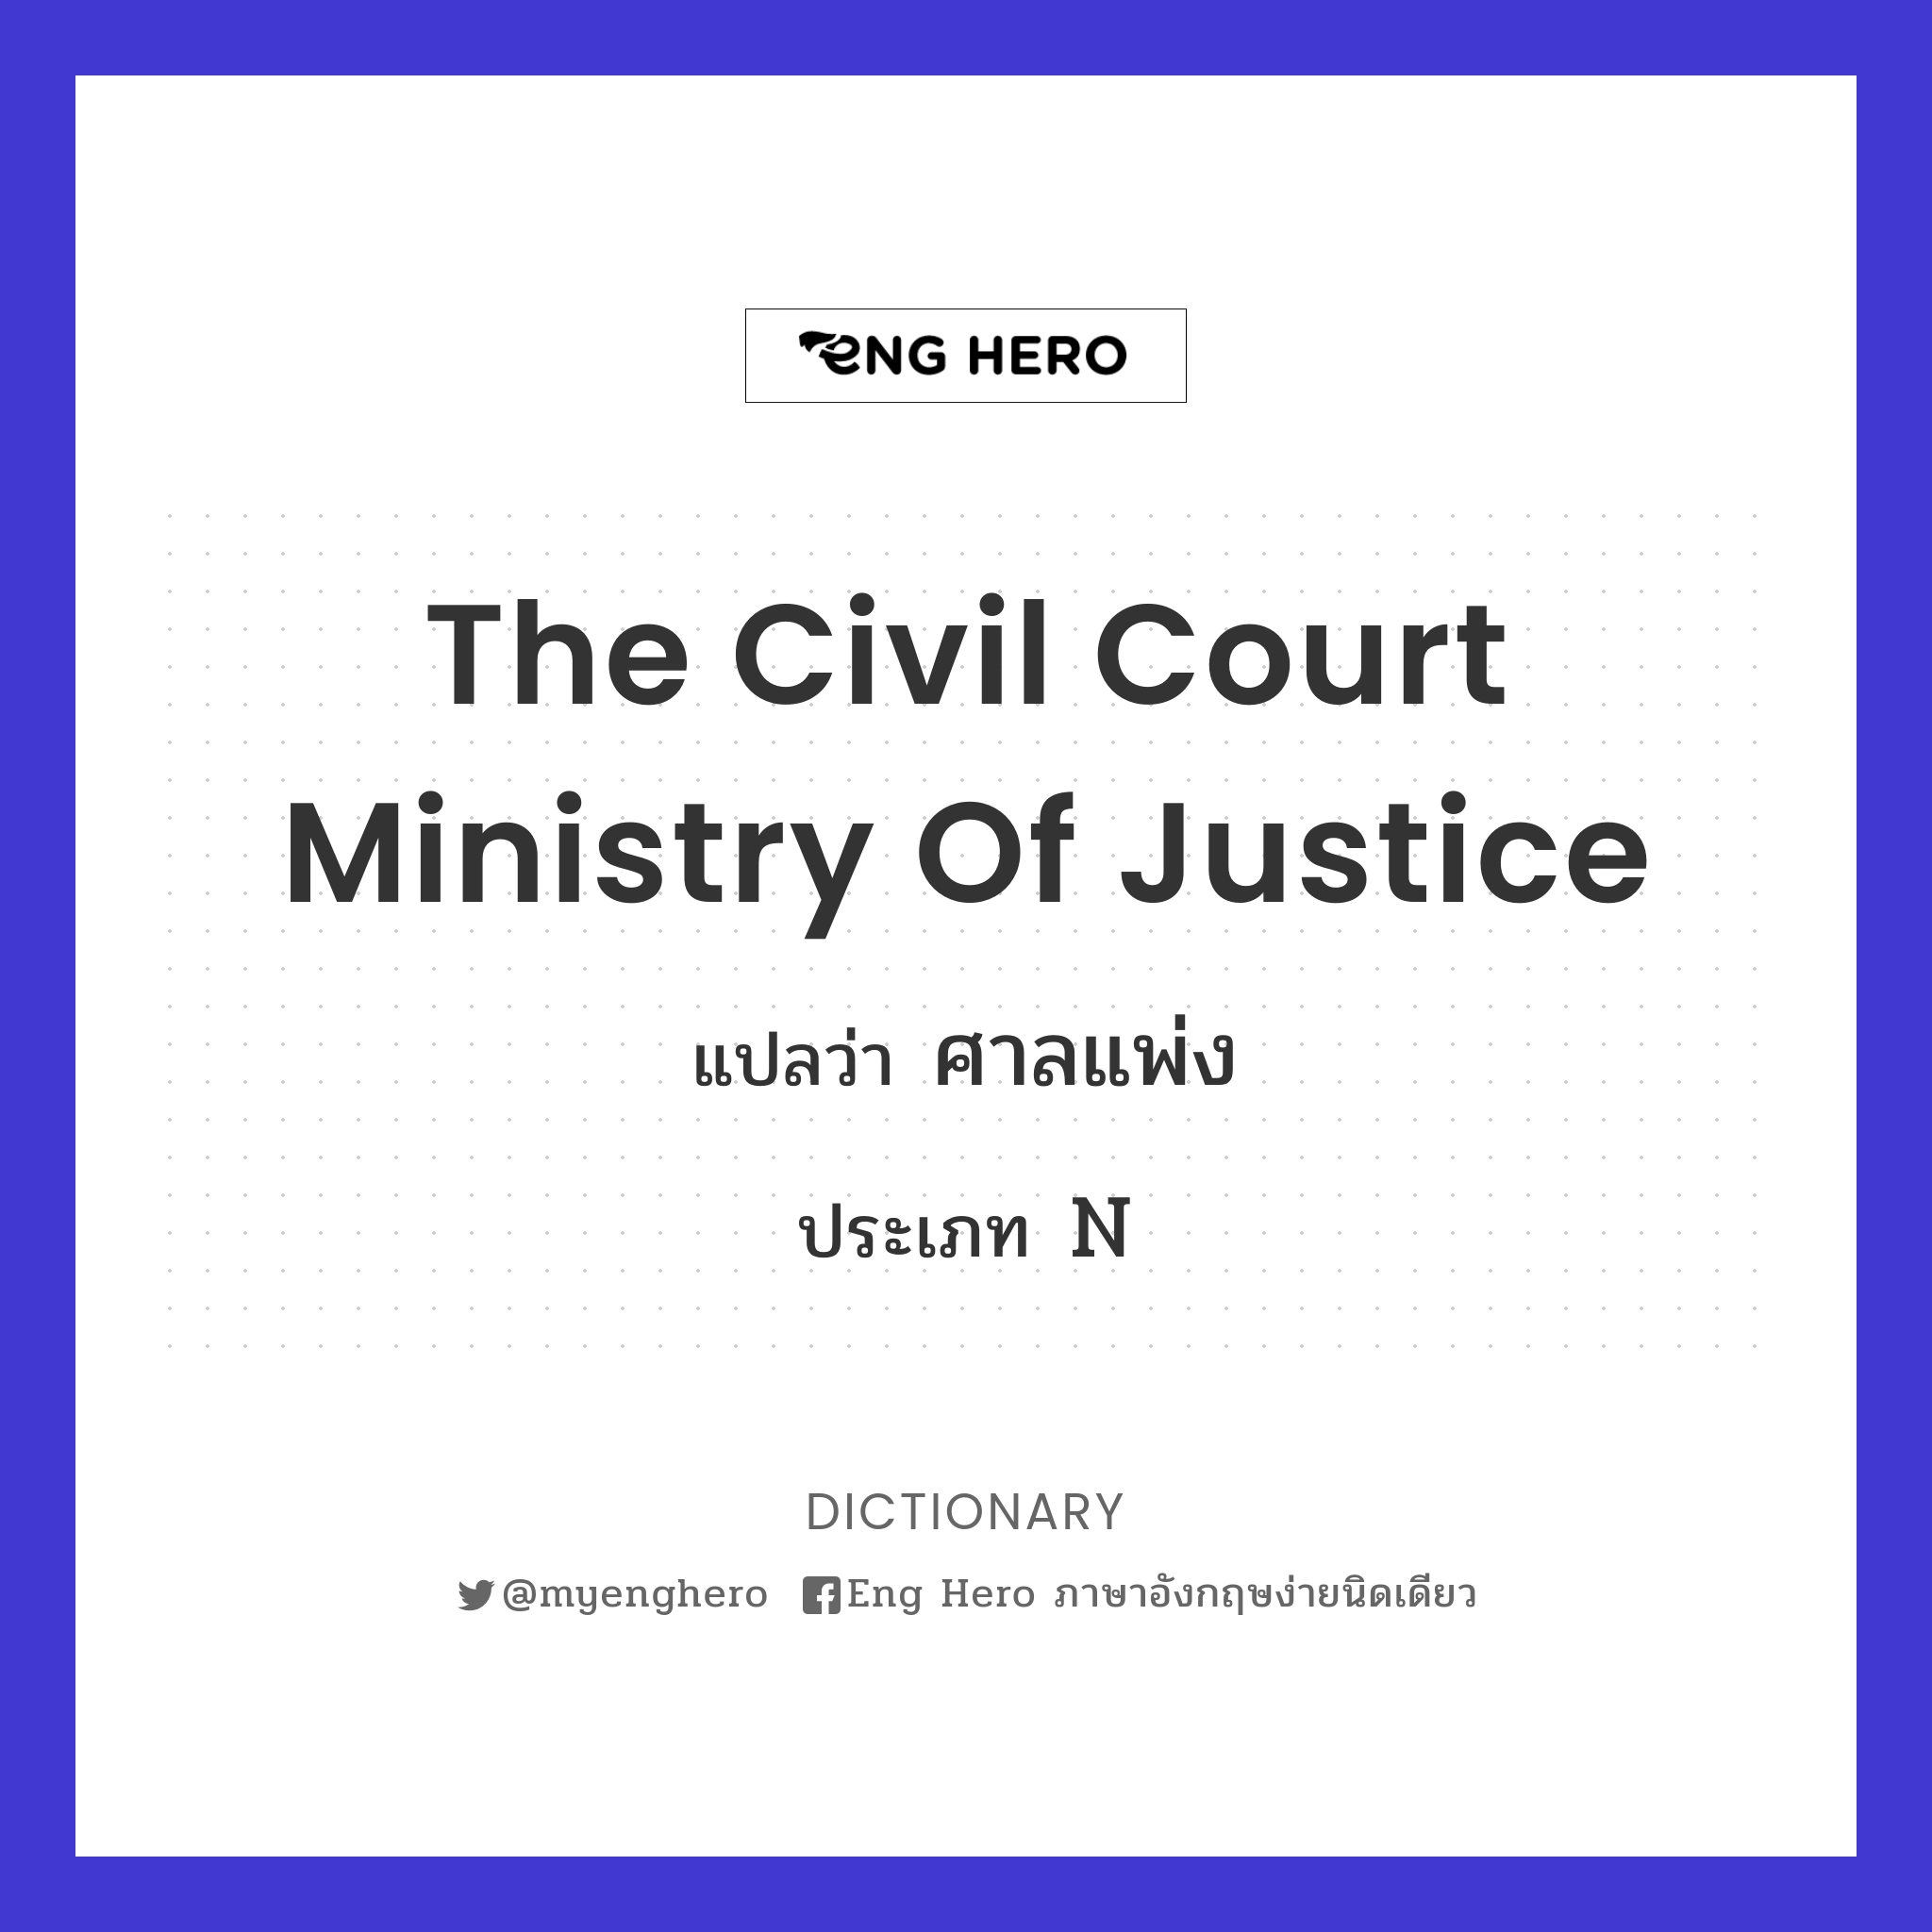 The Civil Court Ministry of Justice